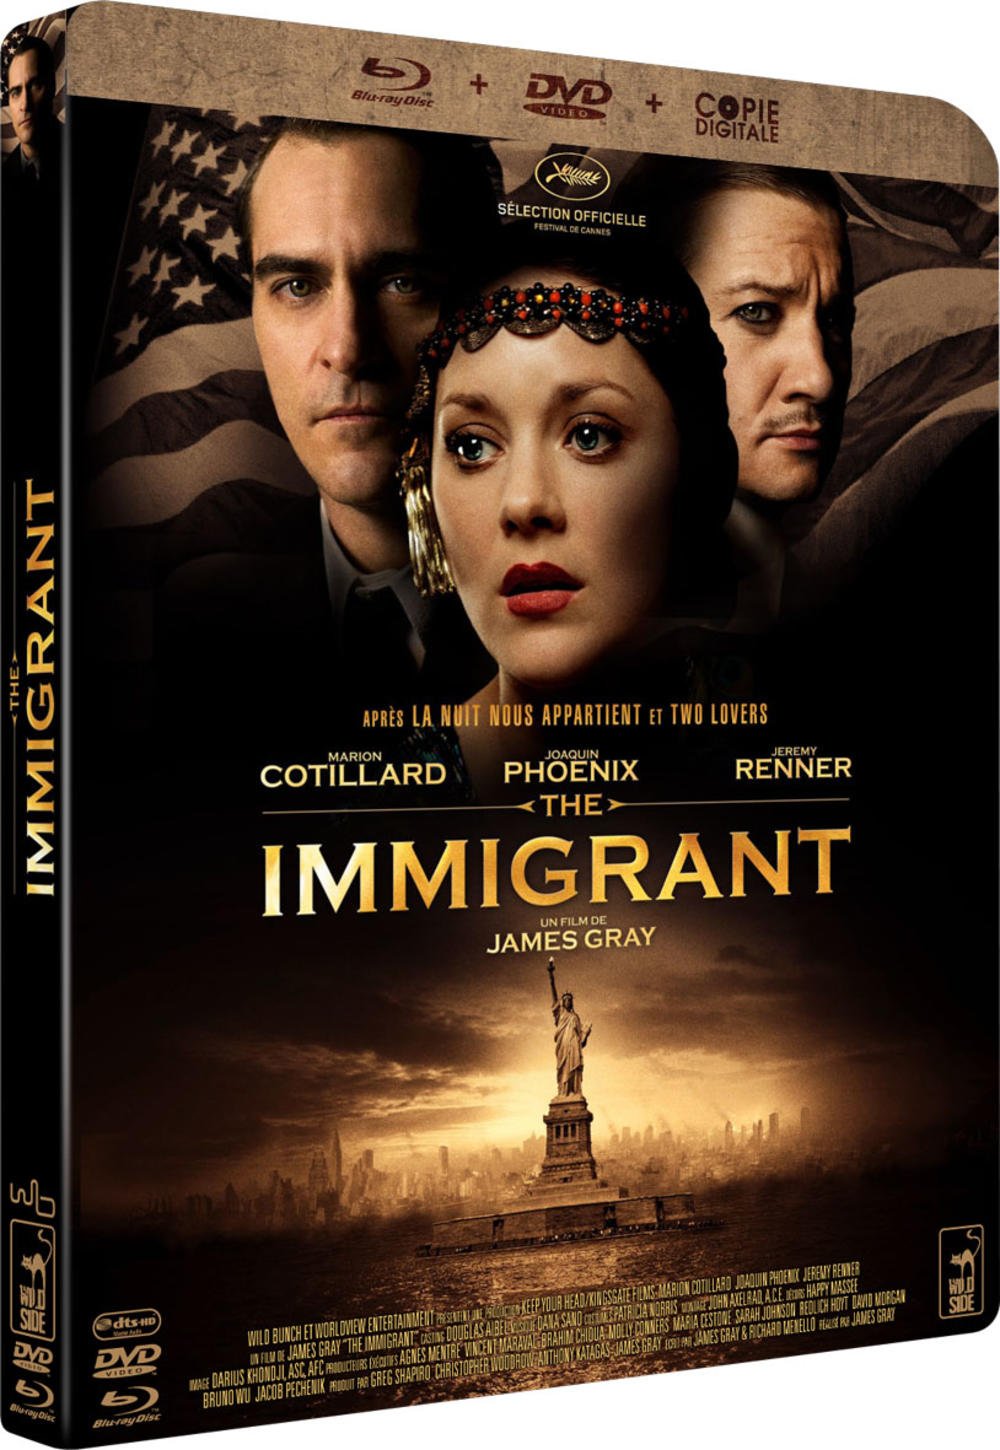 THE IMMIGRANT